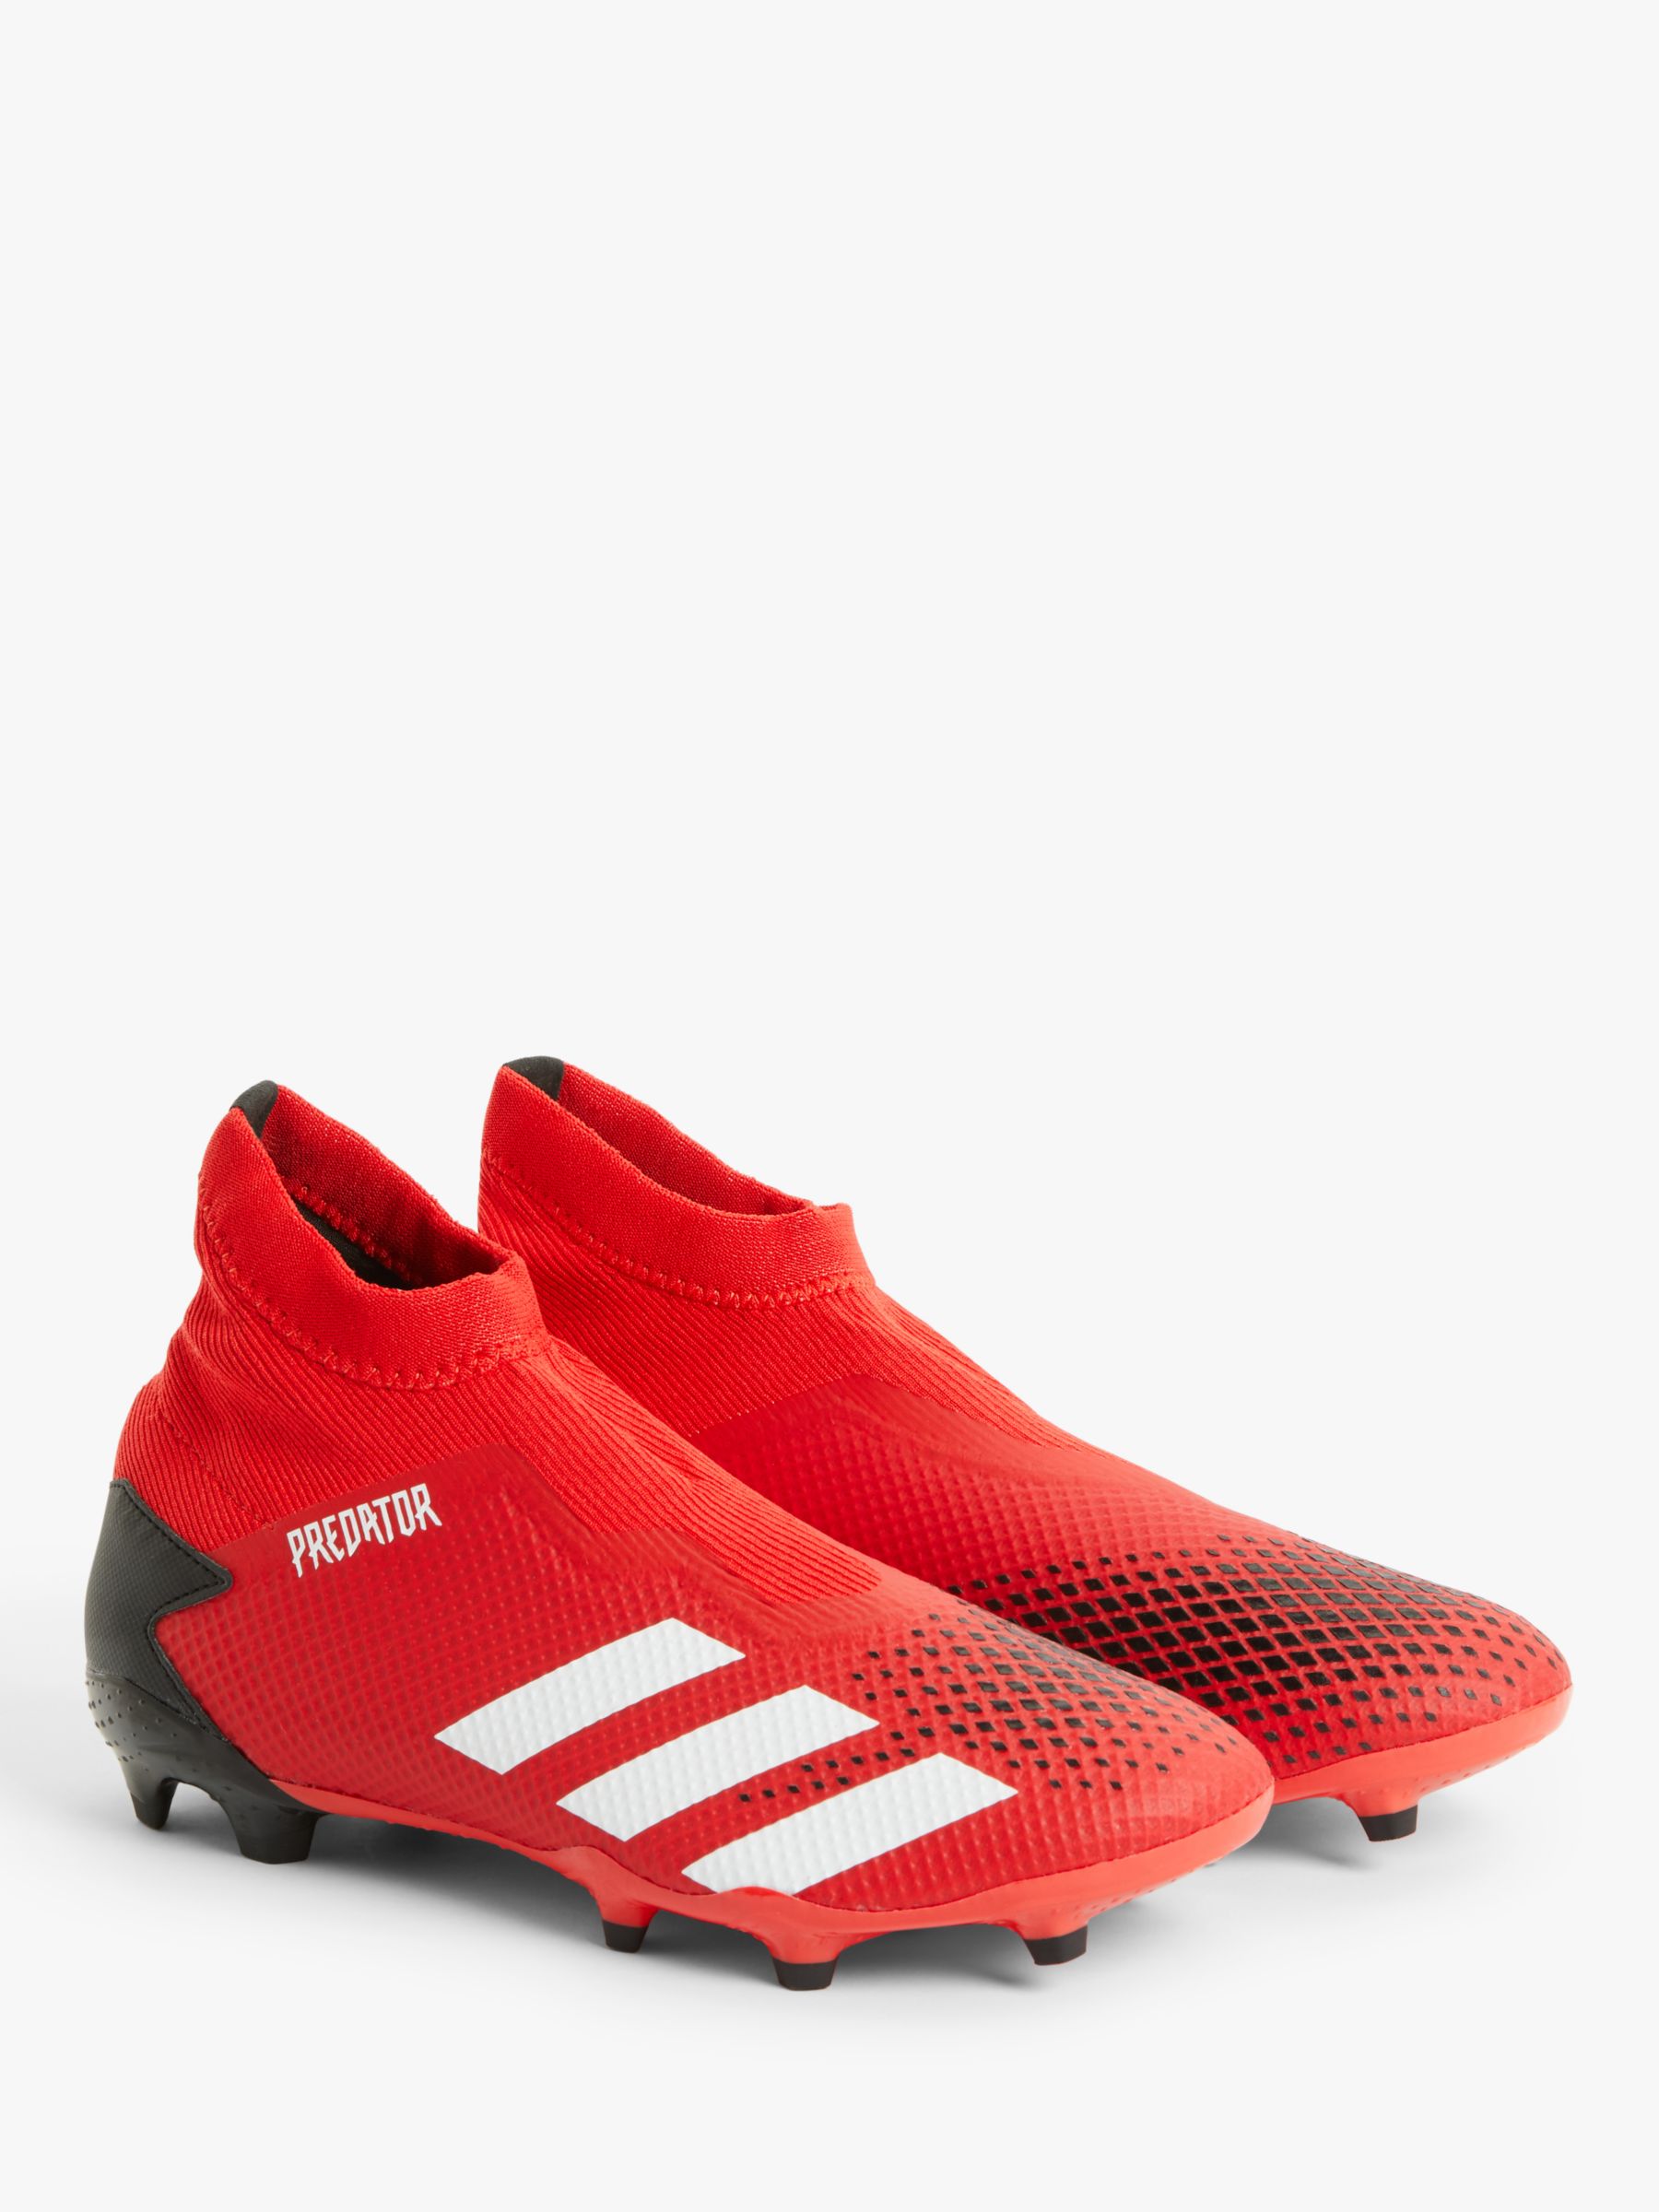 adidas Predator 20.3 Flexible Ground Men's Football Boots, Active Red at John Lewis & Partners